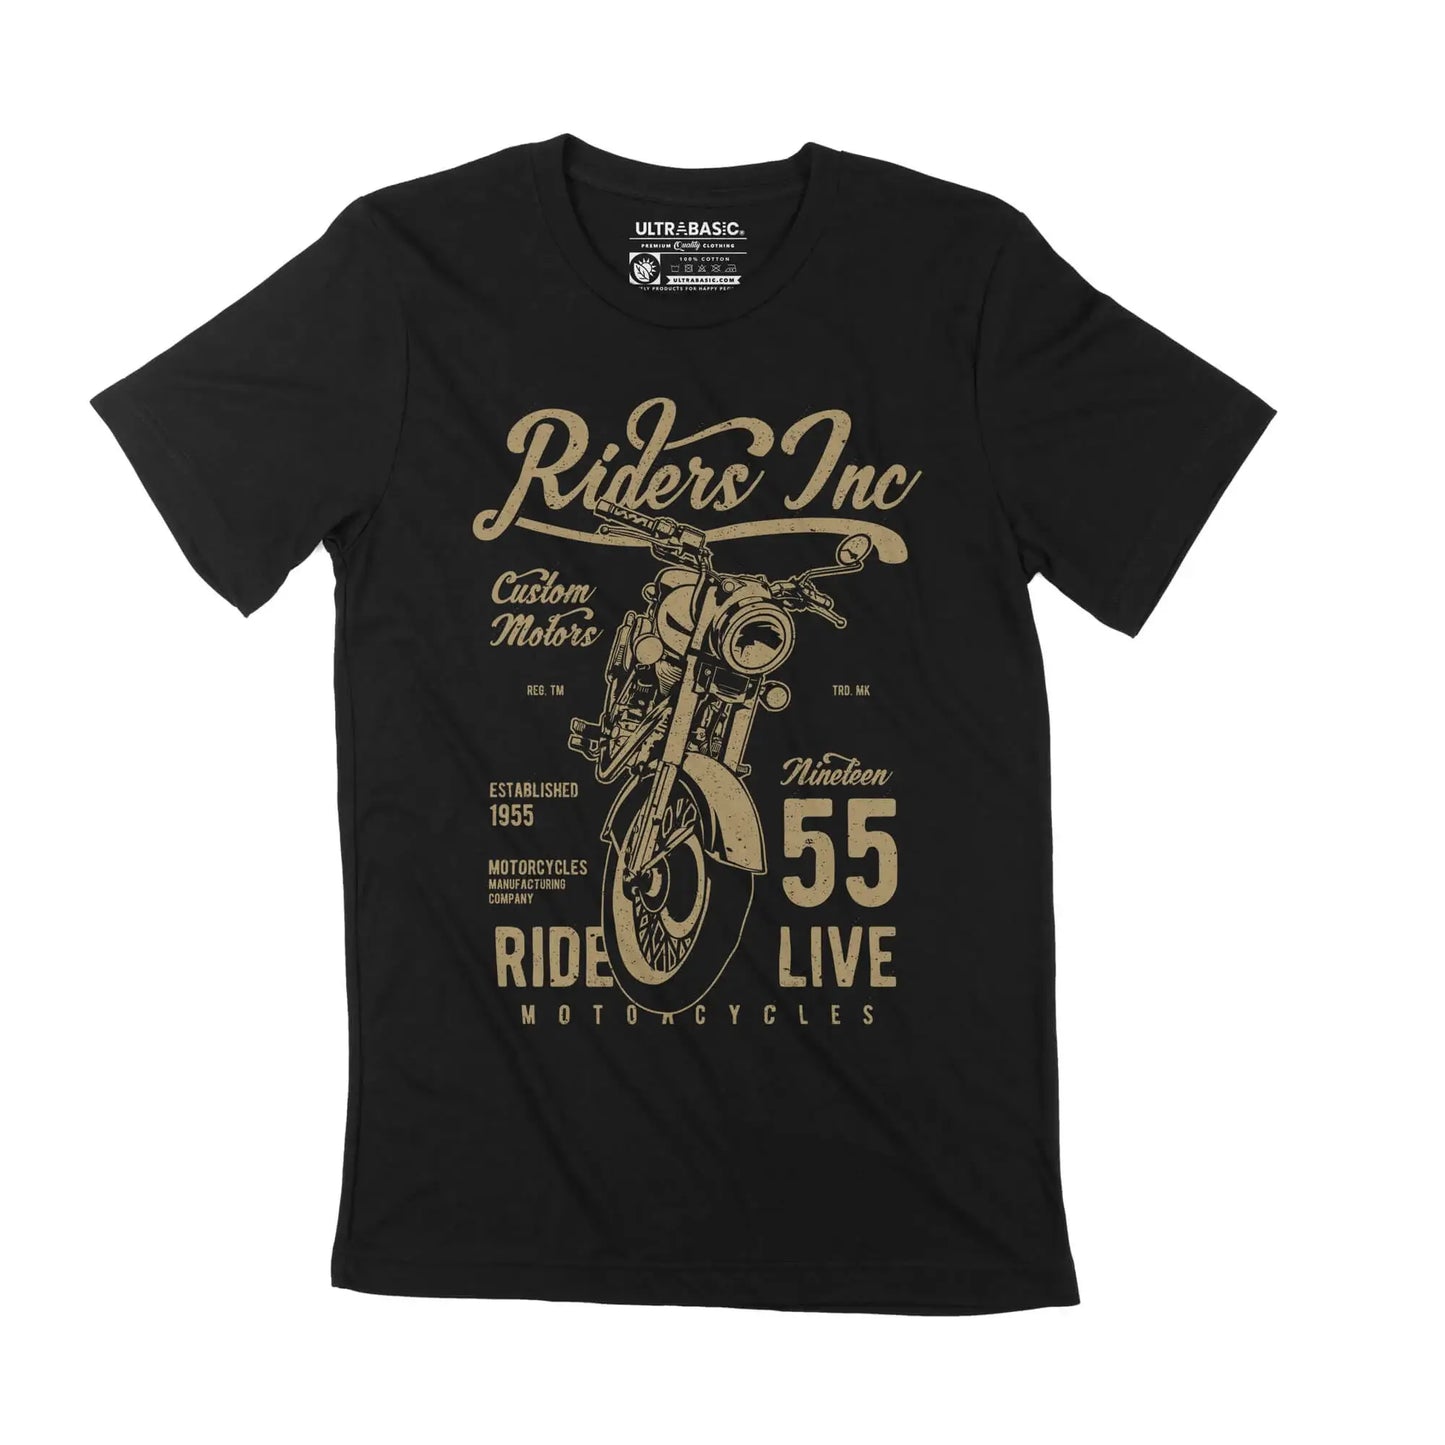 Men's Graphic T-Shirt Live Ride Motorcycles - Custom Motors Created In 1955 69th Birthday Anniversary 69 Year Old Gift 1955 Vintage Eco-Friendly Short Sleeve Novelty Tee